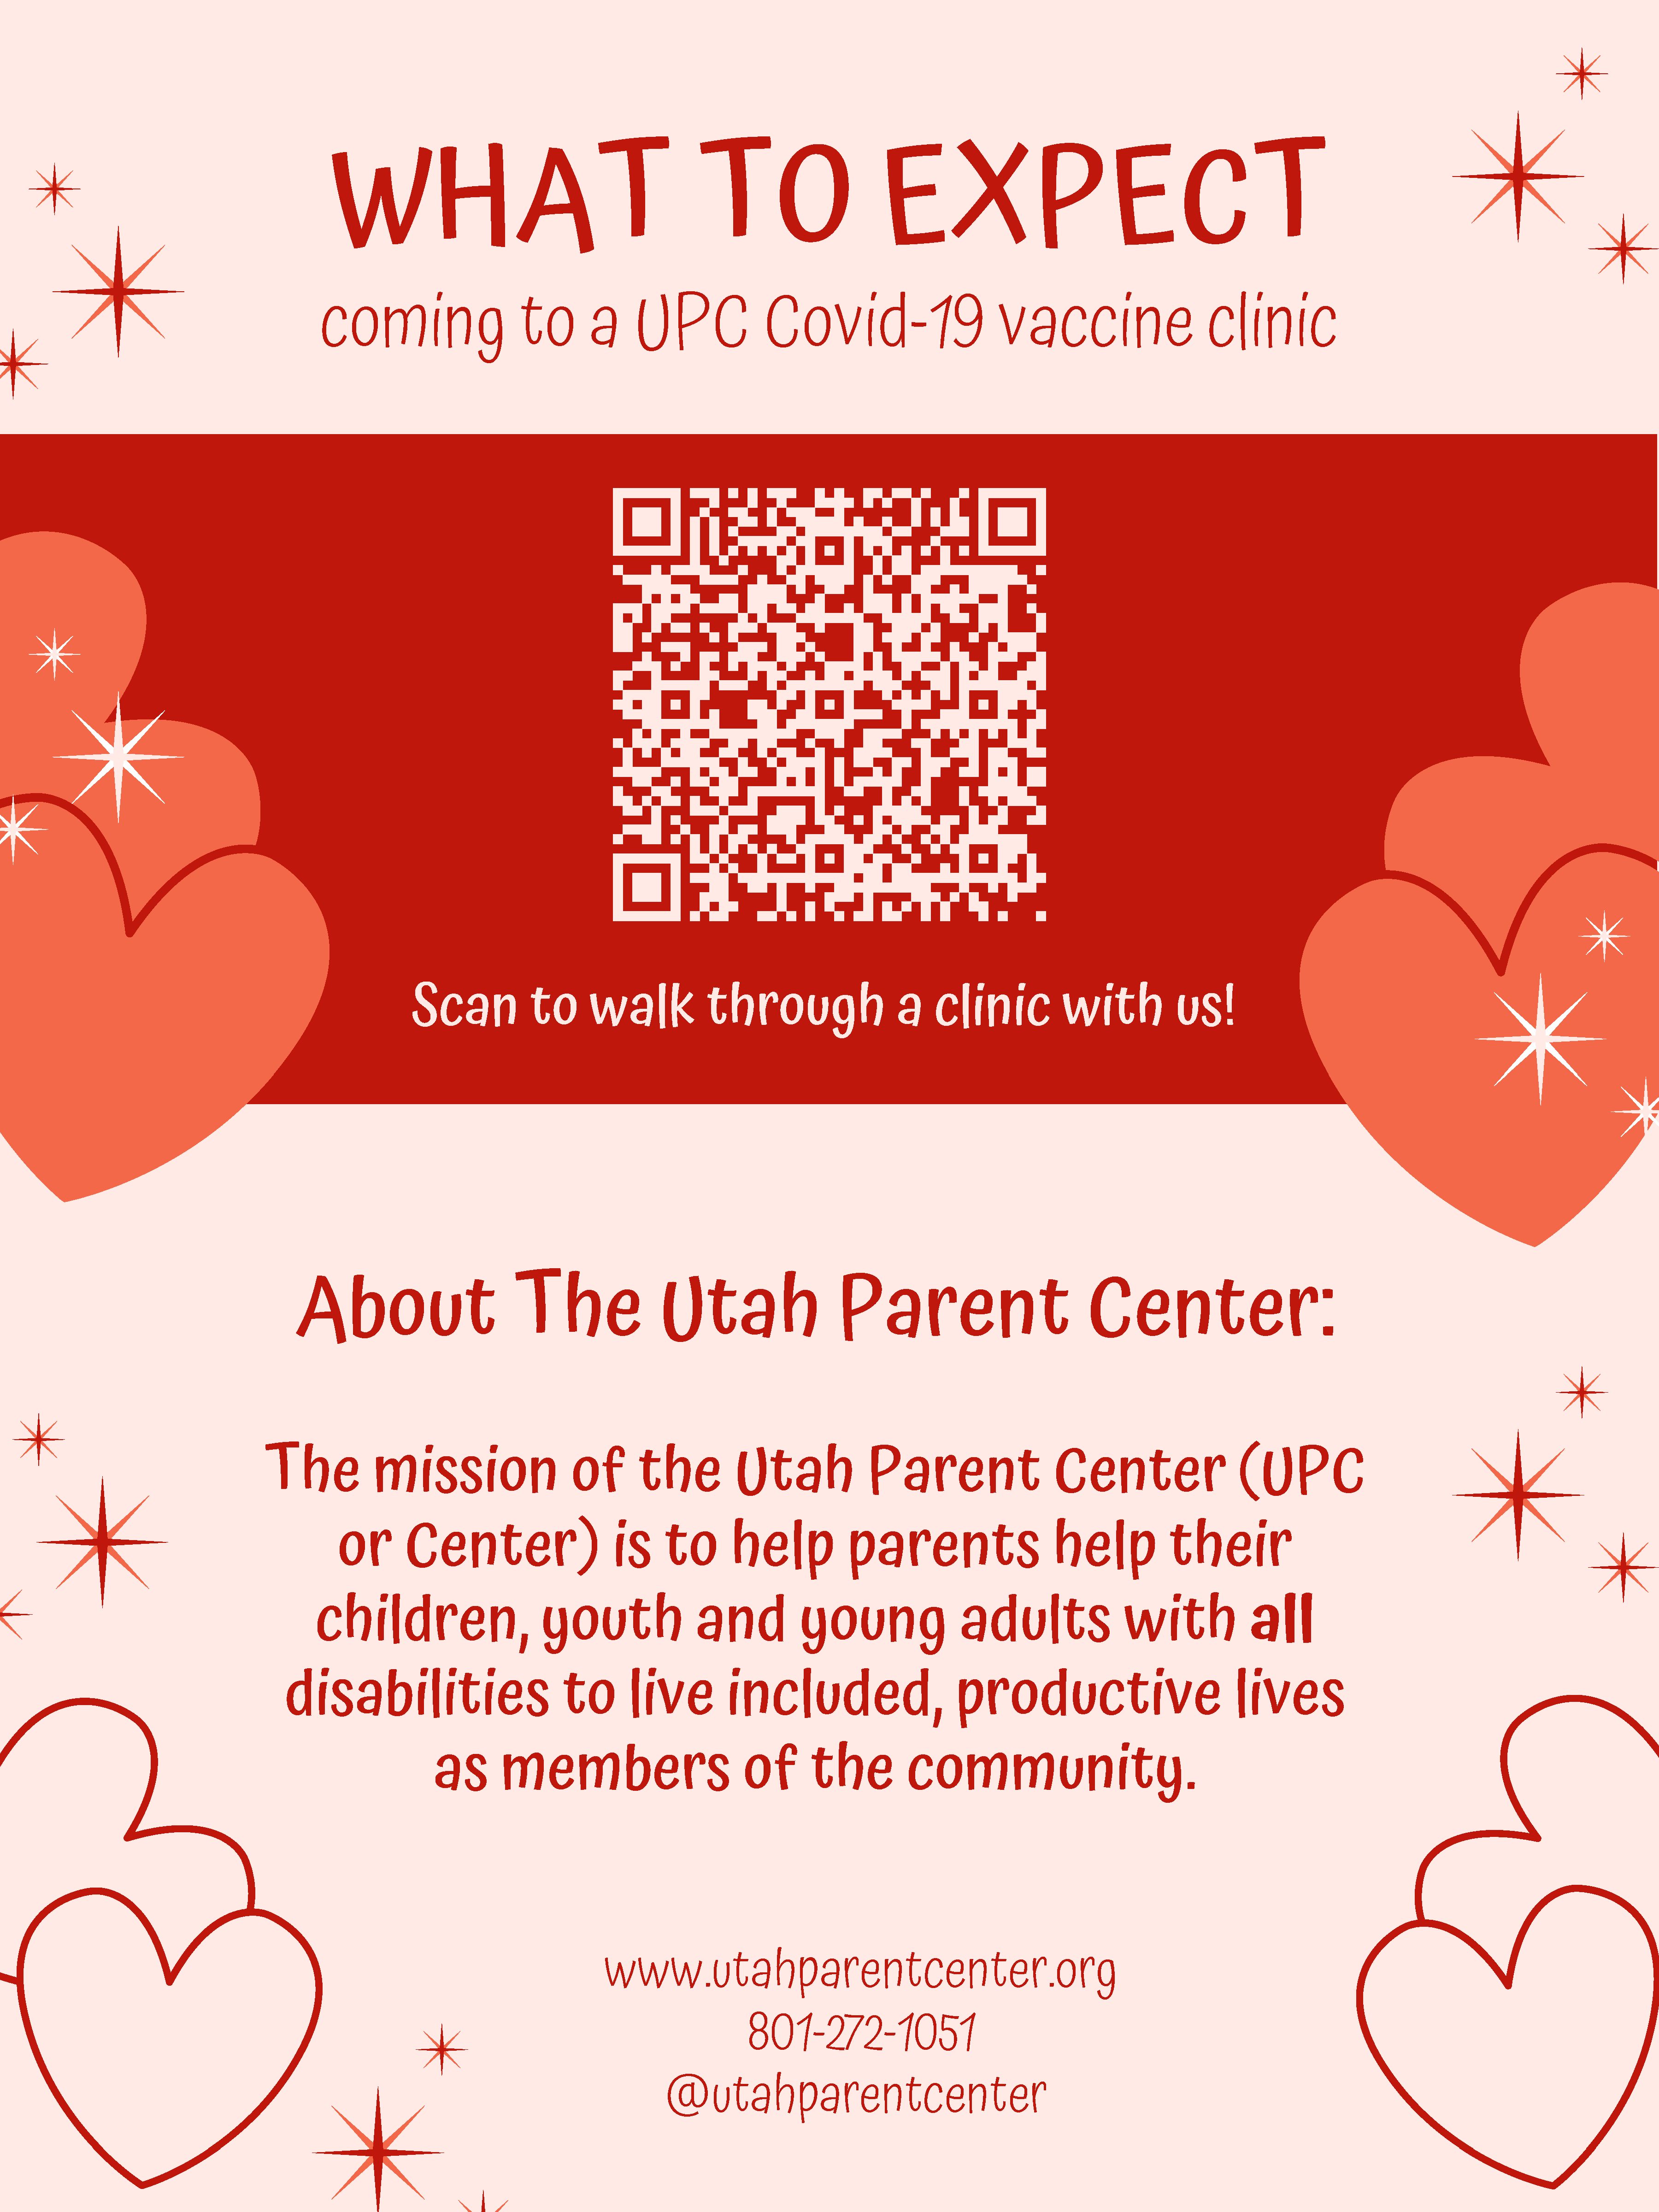 Link:  https://www.ticktok.com/t/ZTRpyRwvU/
About the Utah Parent Center: The mission of the Utah Parent Center is to help parents help their children, youth and young adults with all disabilities to live included, productive lives as members of the community. 